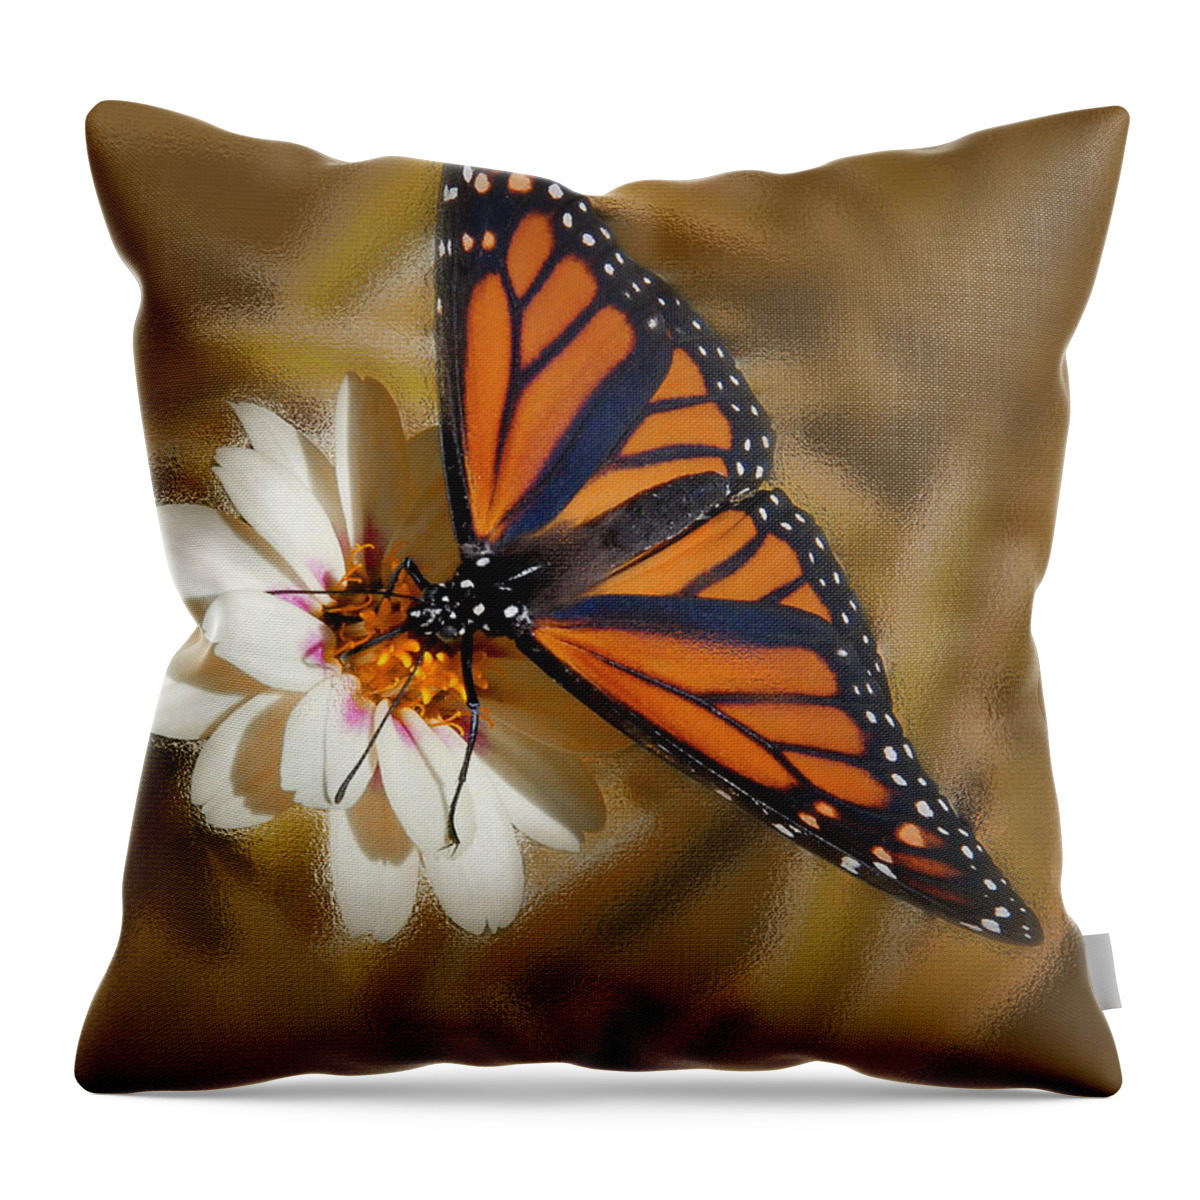 White Flower Throw Pillow featuring the photograph White Flower with Monarch Butterfly by Peg Runyan